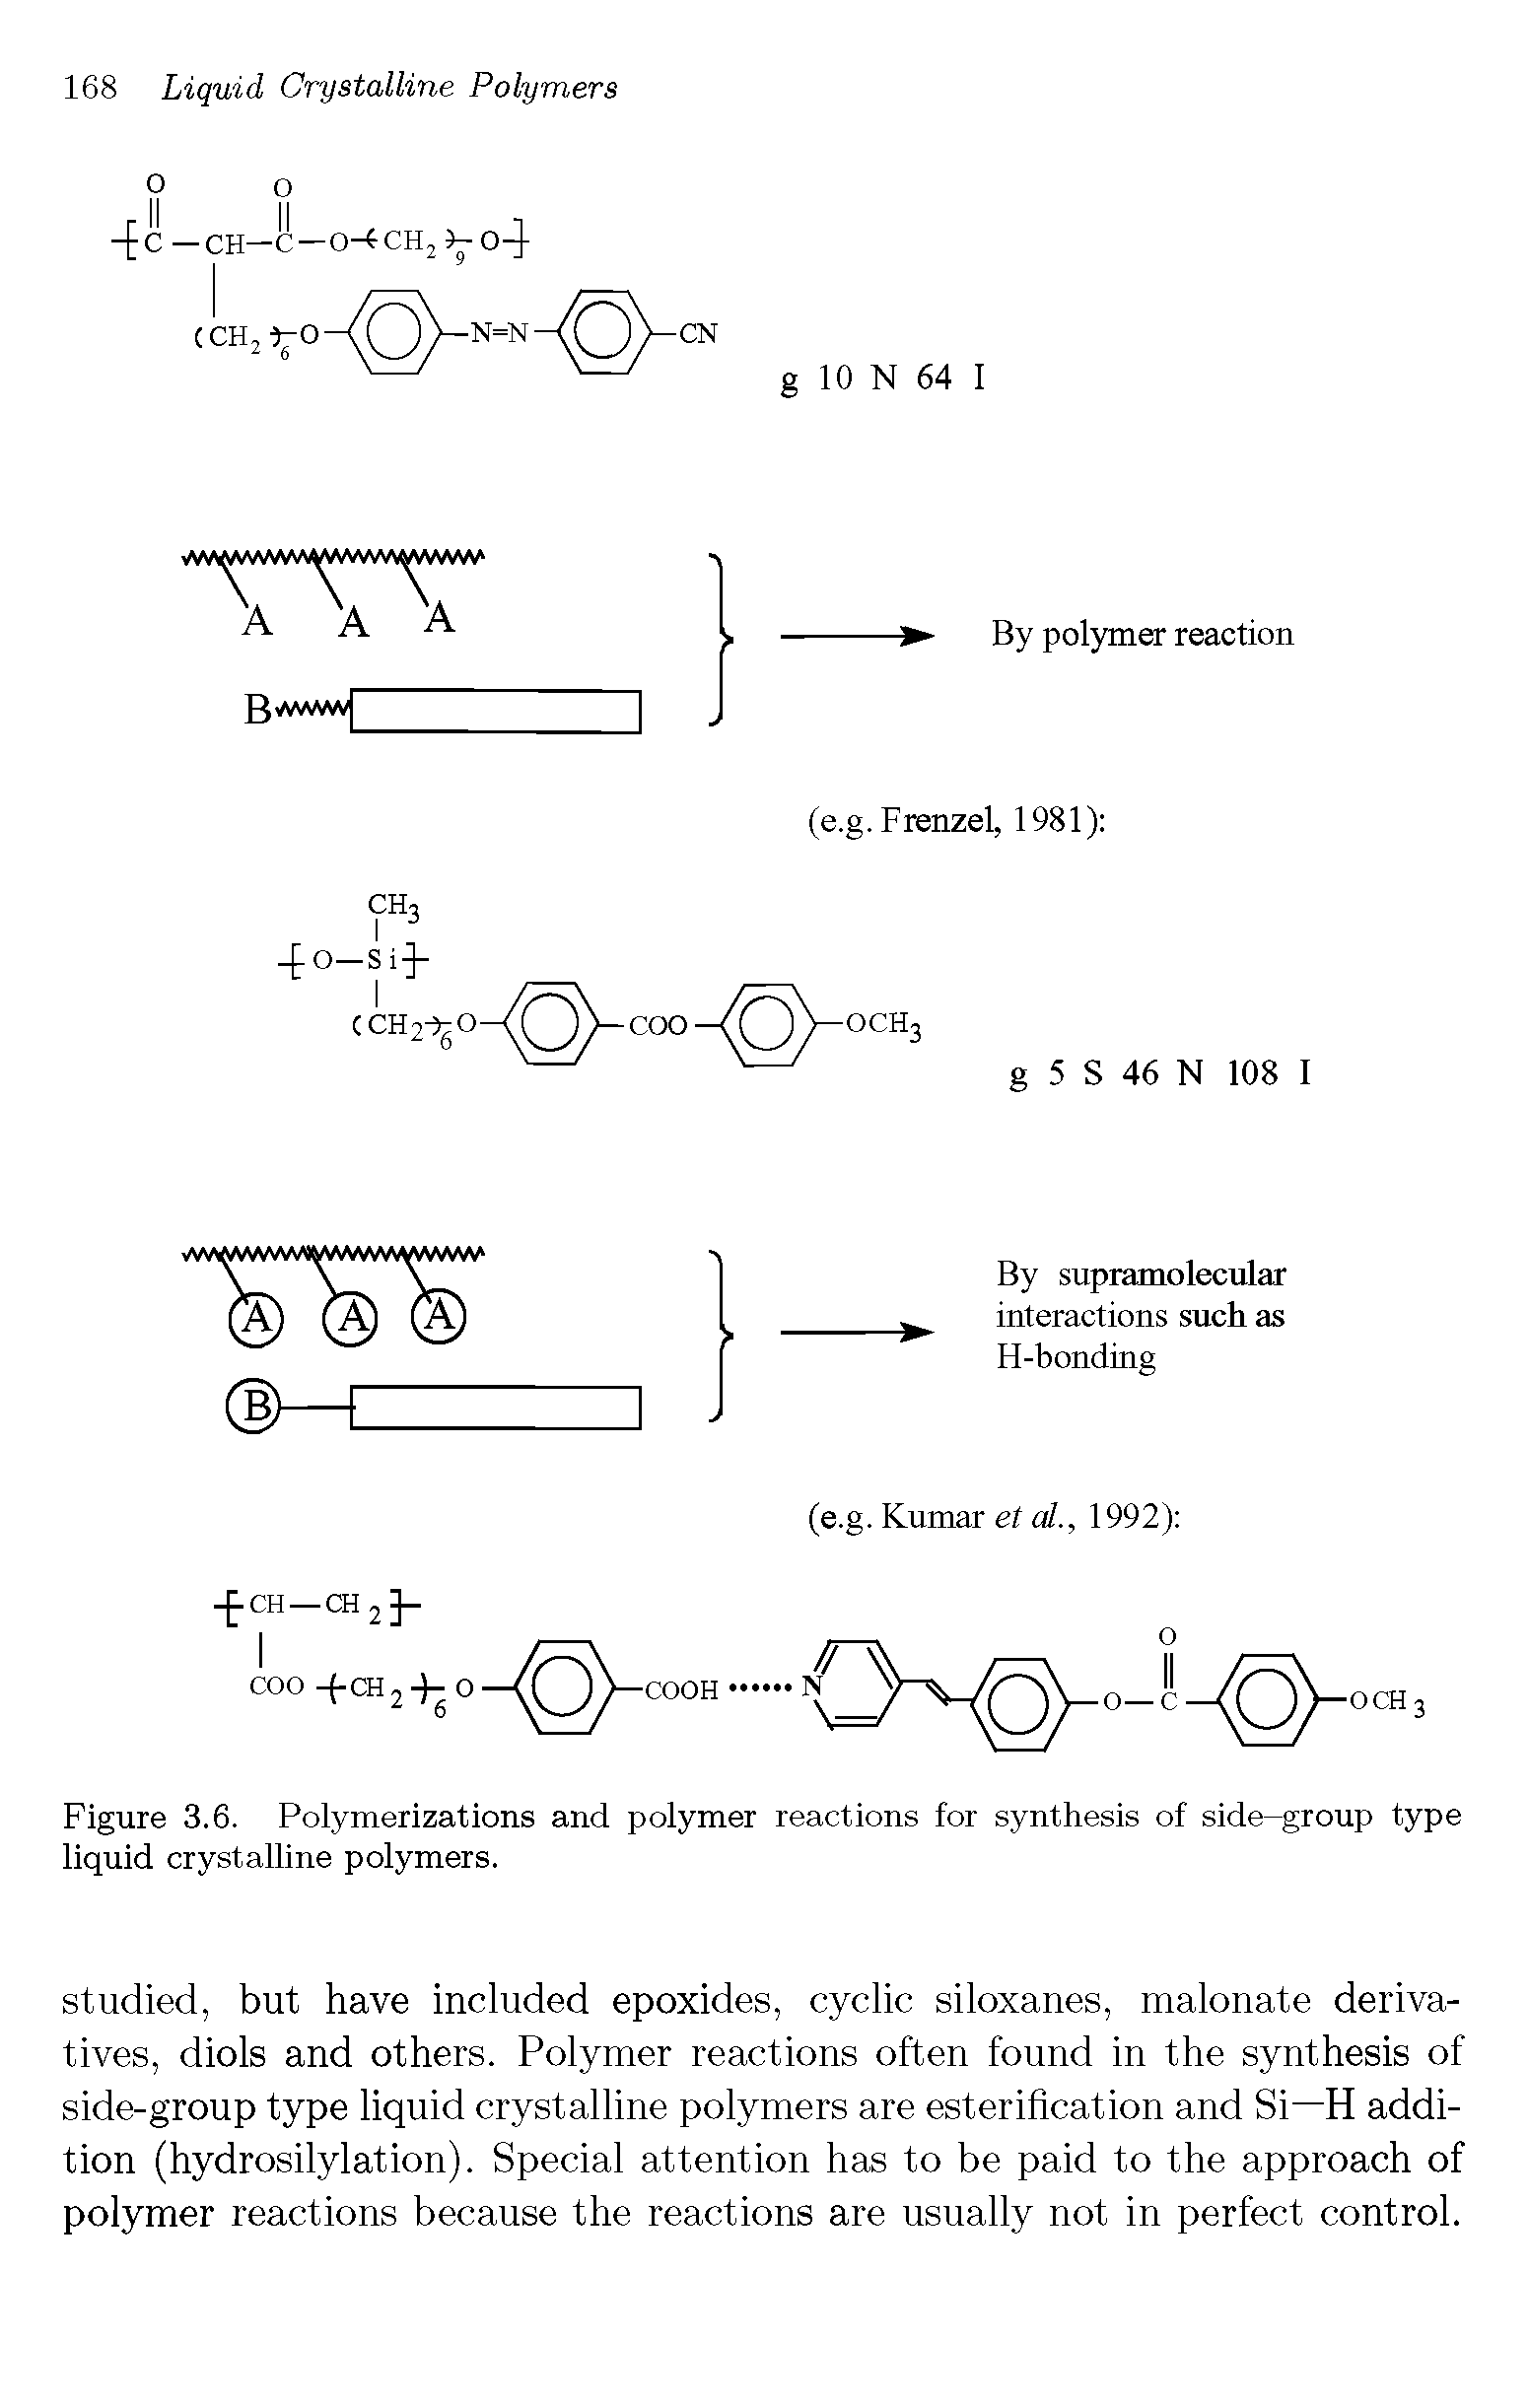 Figure 3.6. Polymerizations and polymer reactions for synthesis of side-group type liquid crystalline polymers.